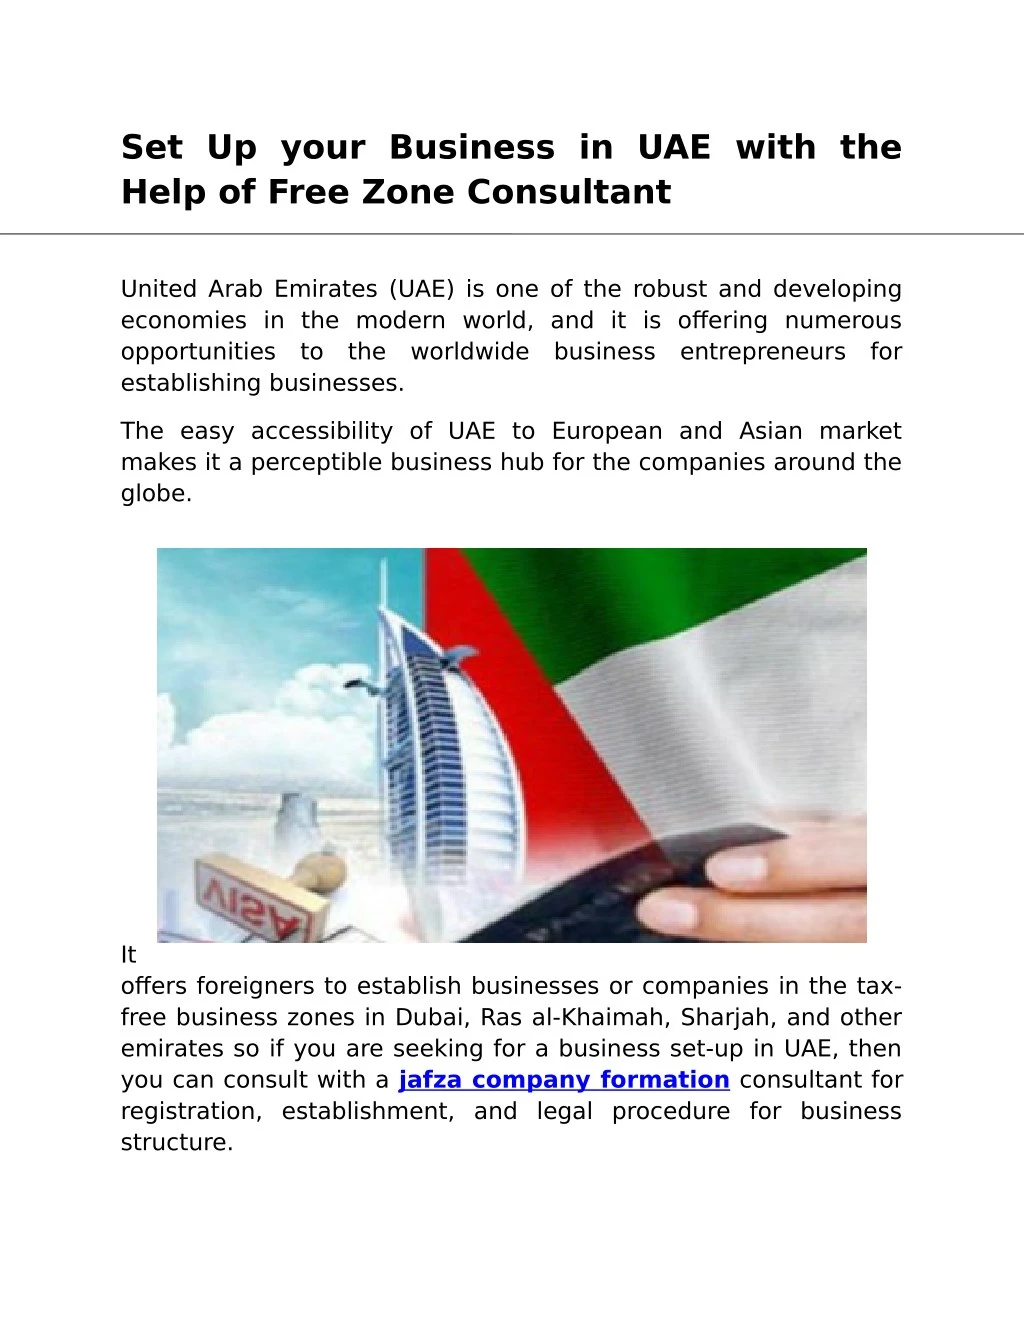 set up your business in uae with the help of free